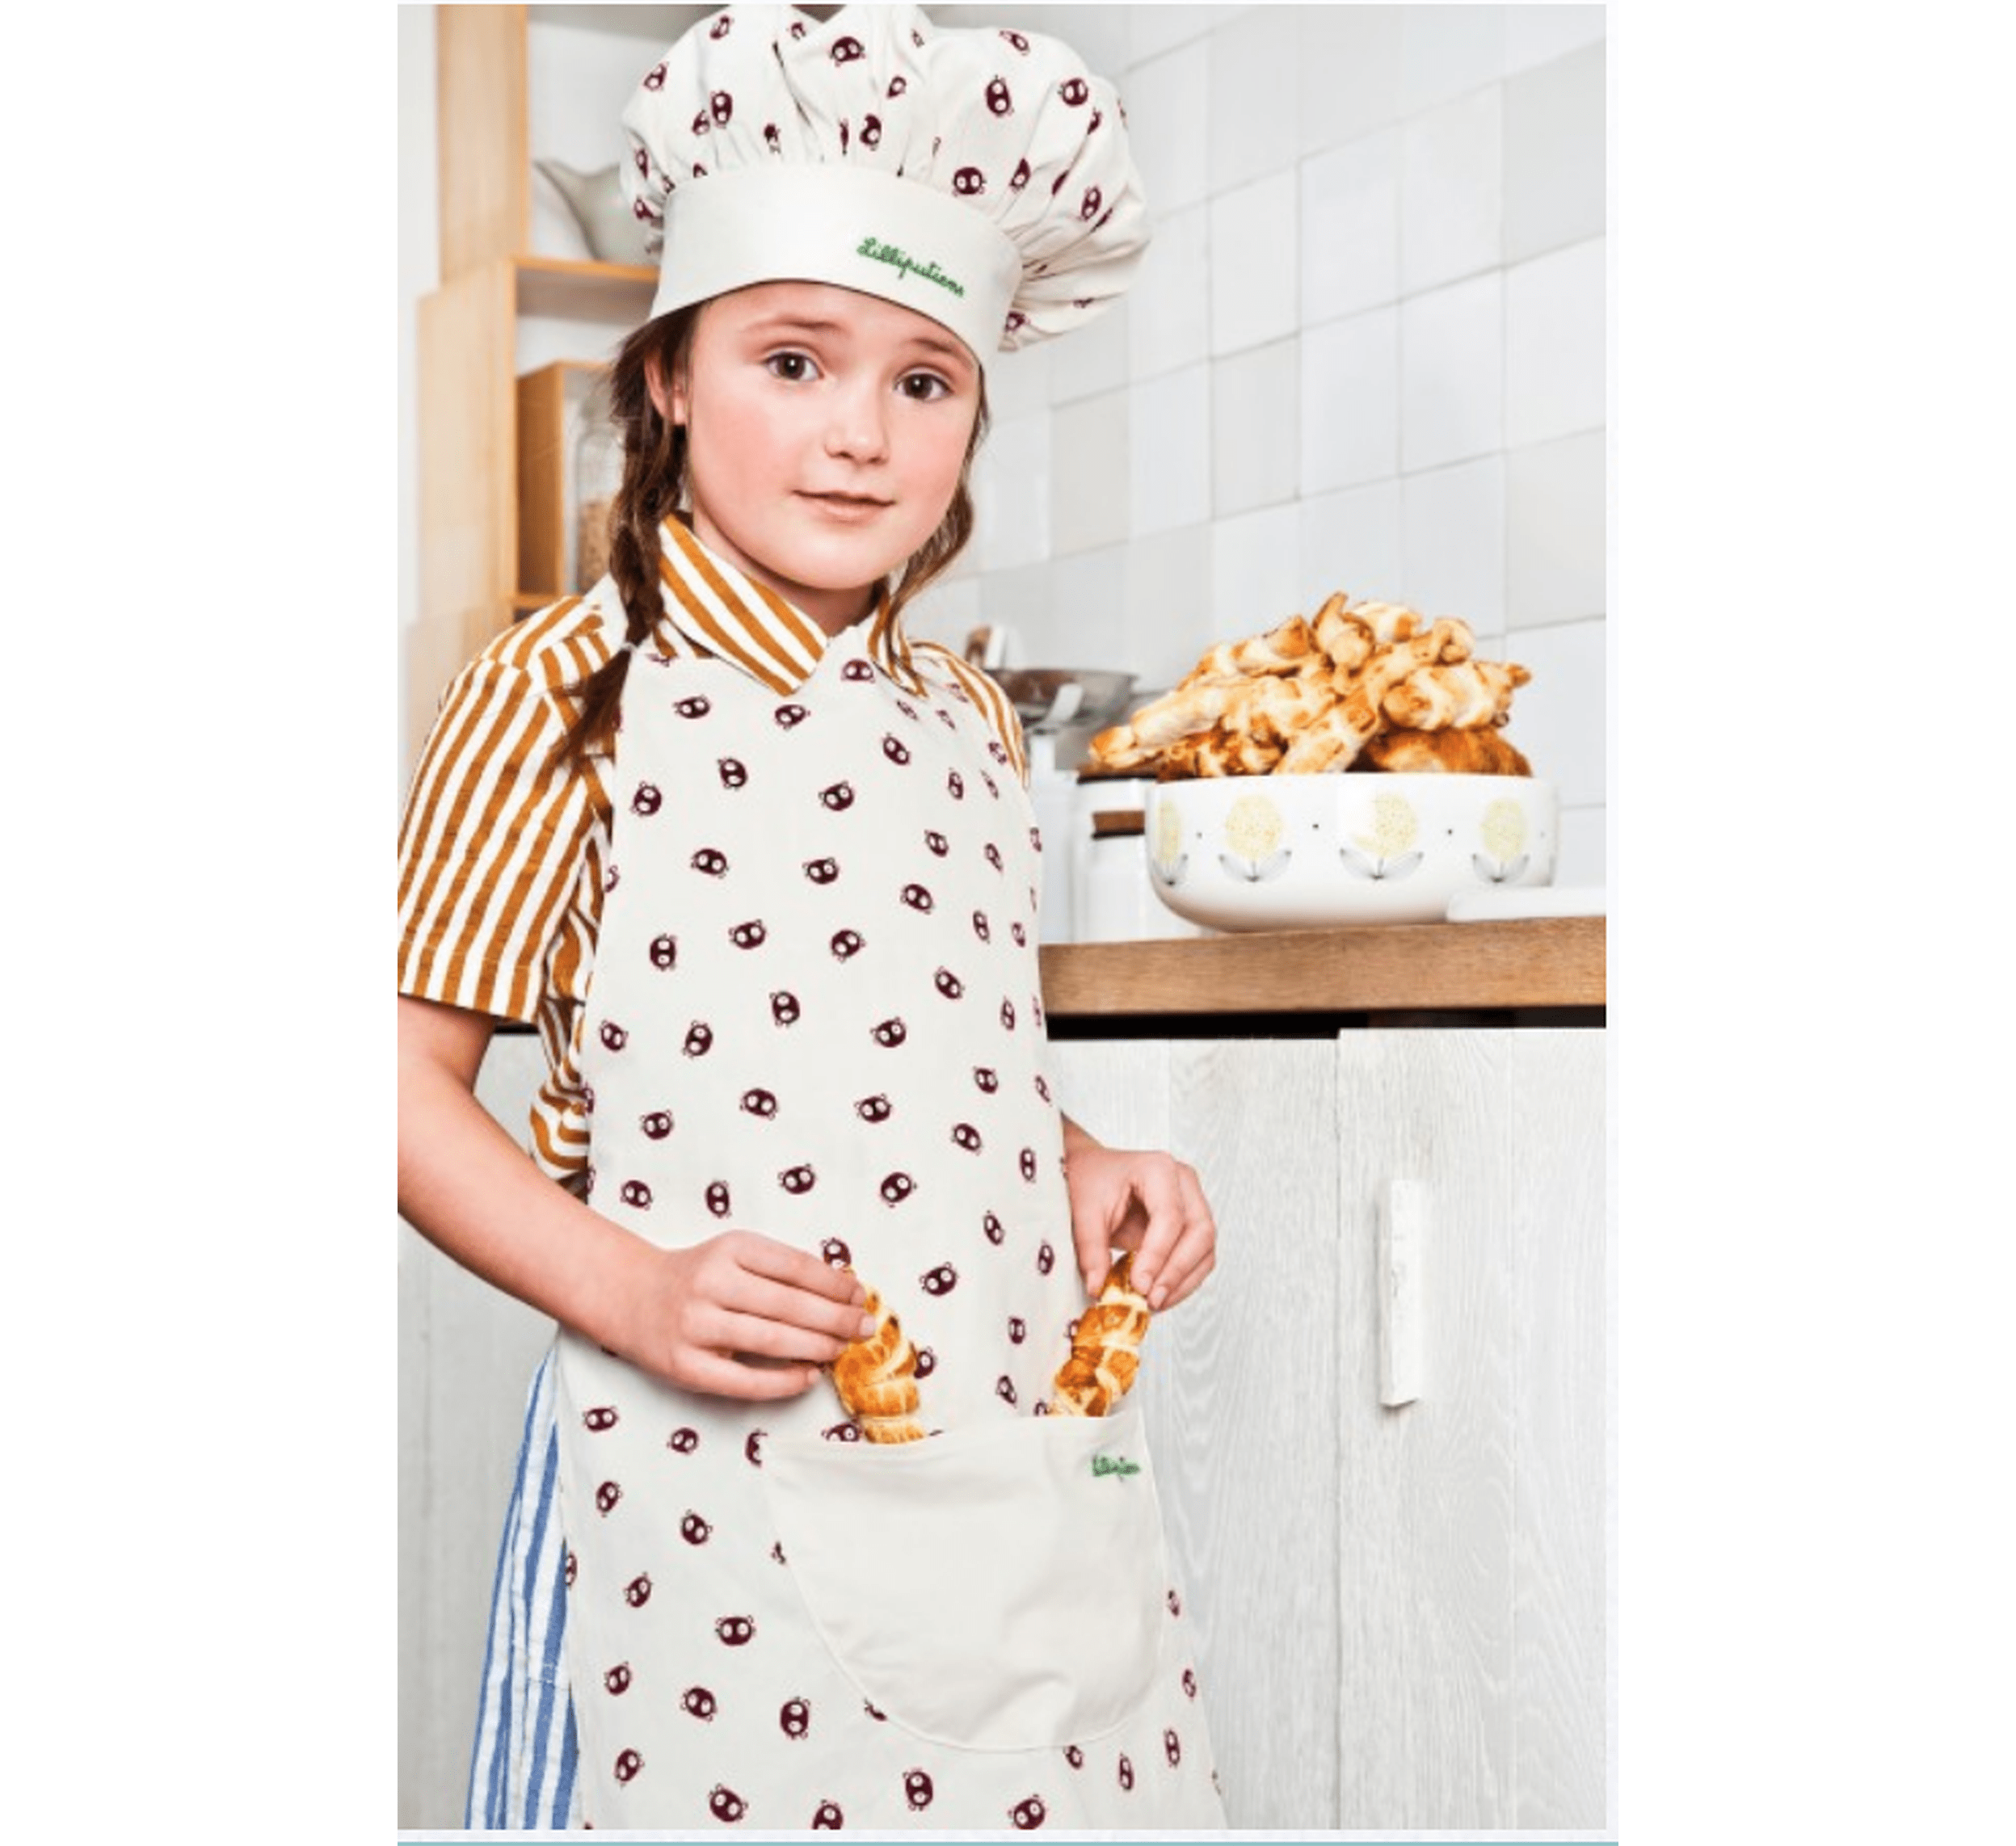 LITTLE CHEF. Georges cooking apron and hat-littlechef-Lilliputiens-jellyfishkids.com.cy